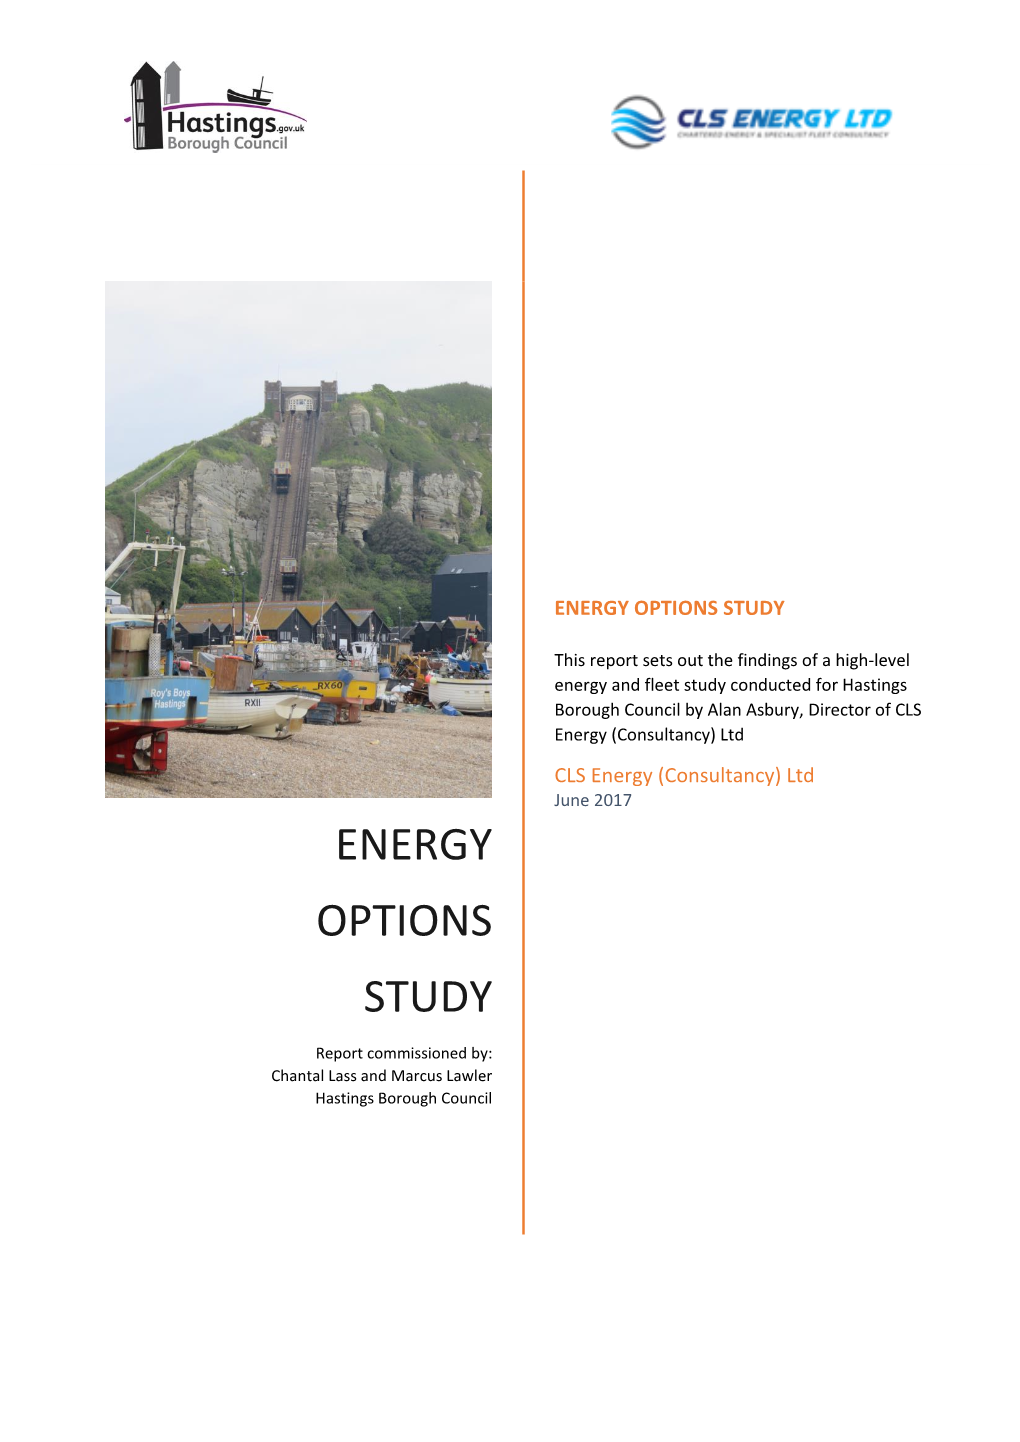 Energy Options Study by CLS Energy June 2017